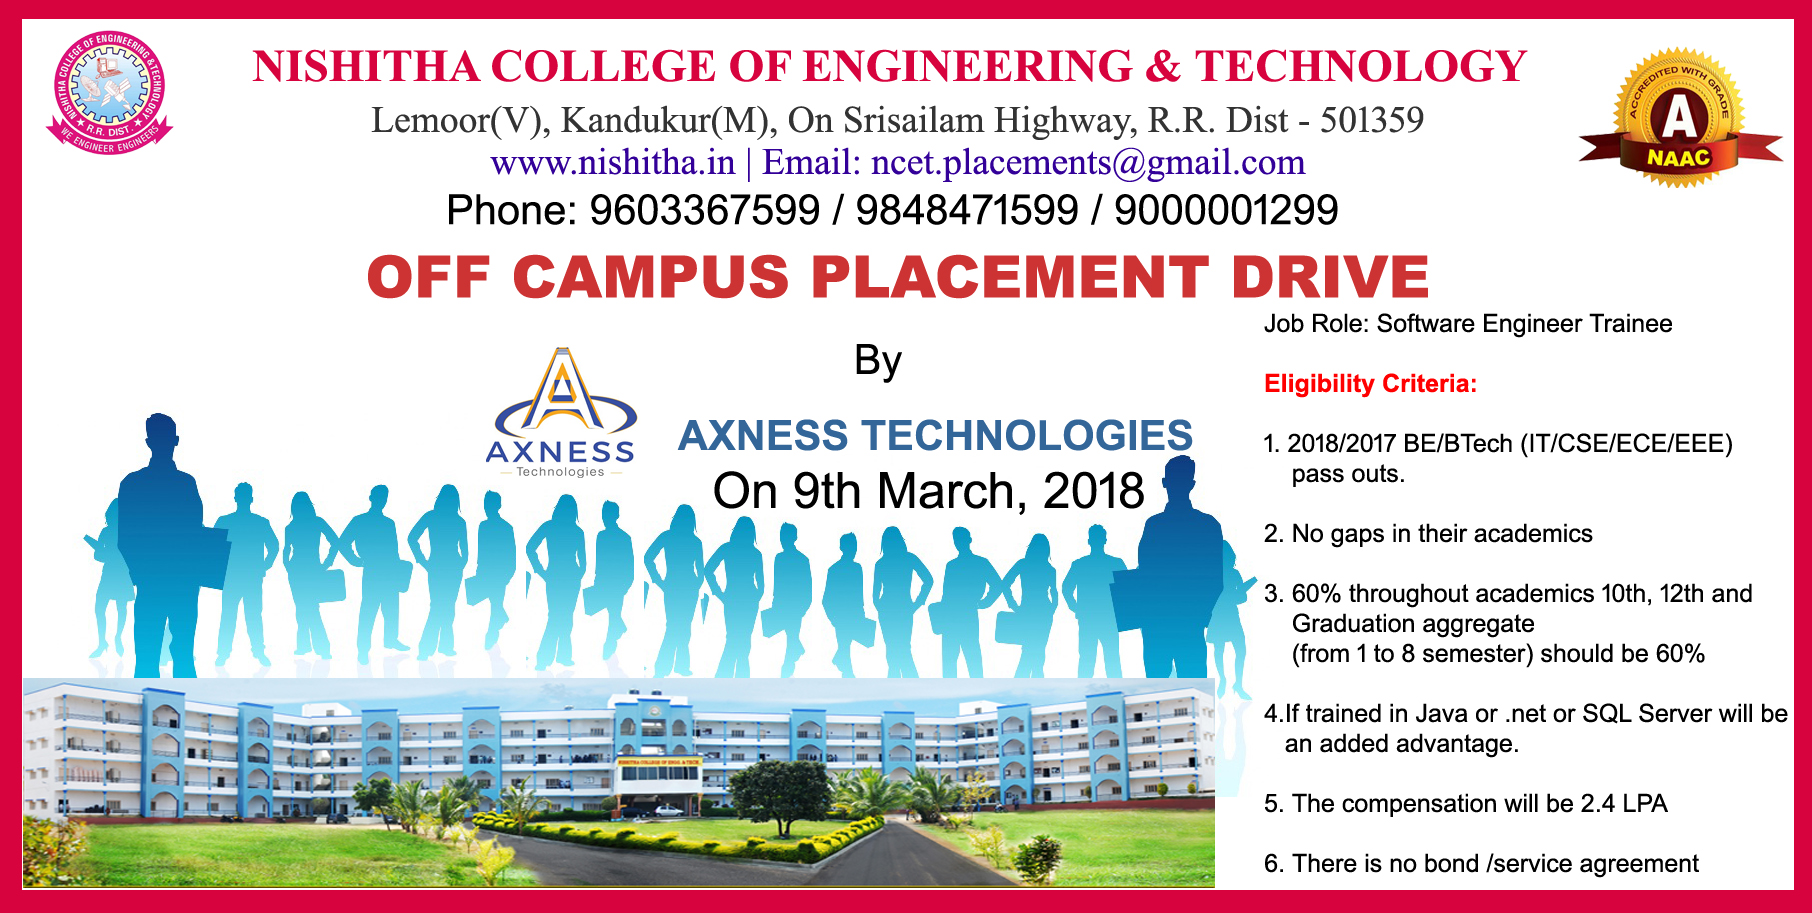 axness-technologies-off-campus-drive-for-be-btech-freshers-in-hyderabad-as-software-engineer